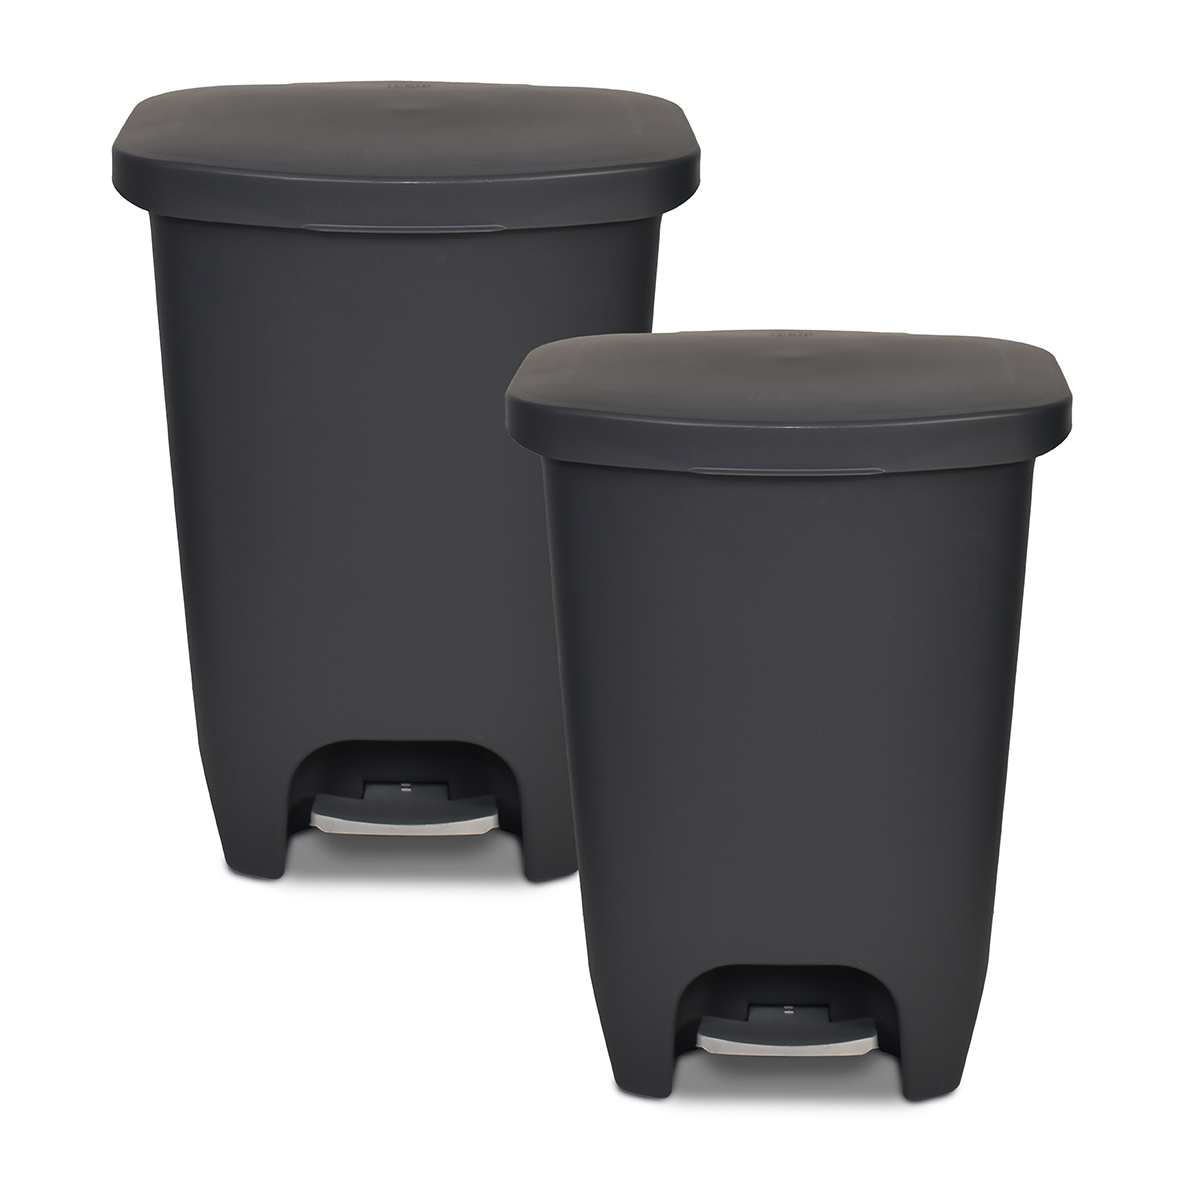 Glad Plastic Step Kitchen Garbage Can, 13 gal, Gray, 2 Pack - image 1 of 10